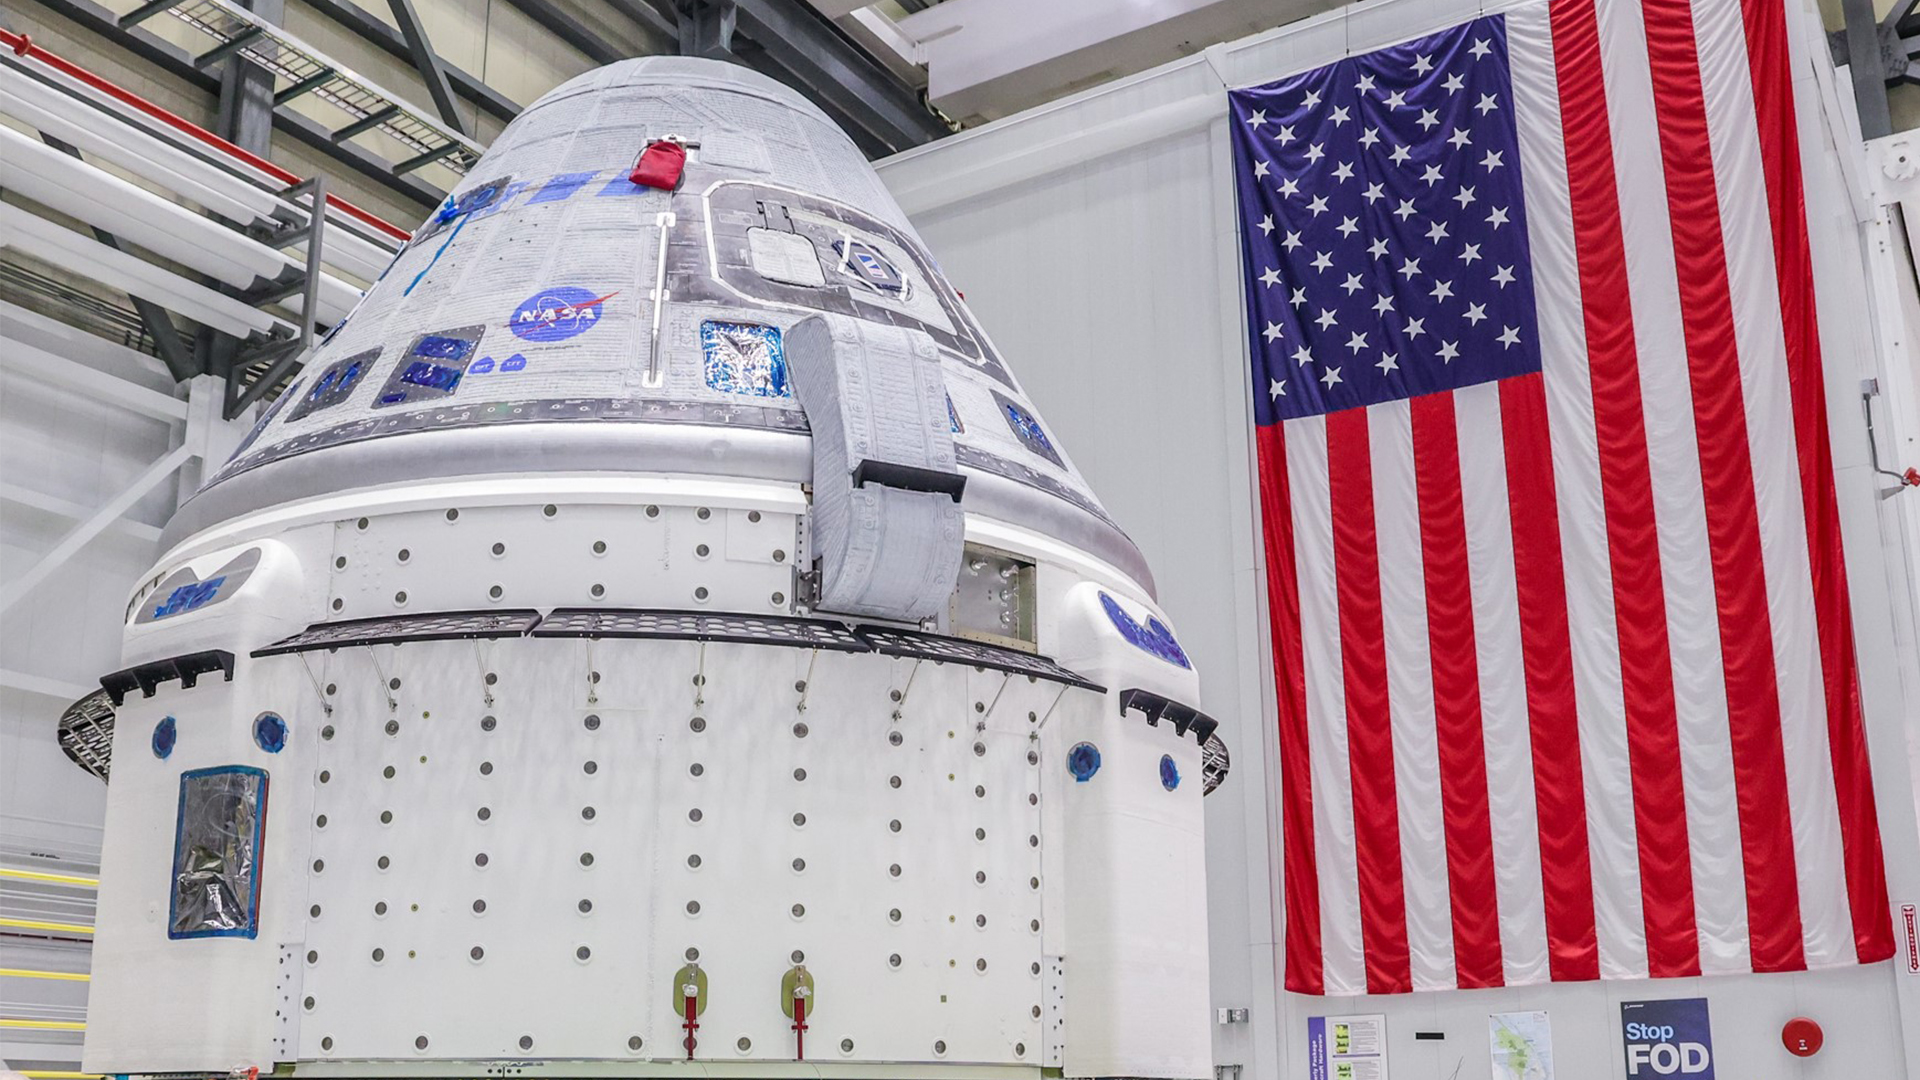 Boeing’s Starliner spacecraft is ‘go’ for May 6 astronaut launch Space